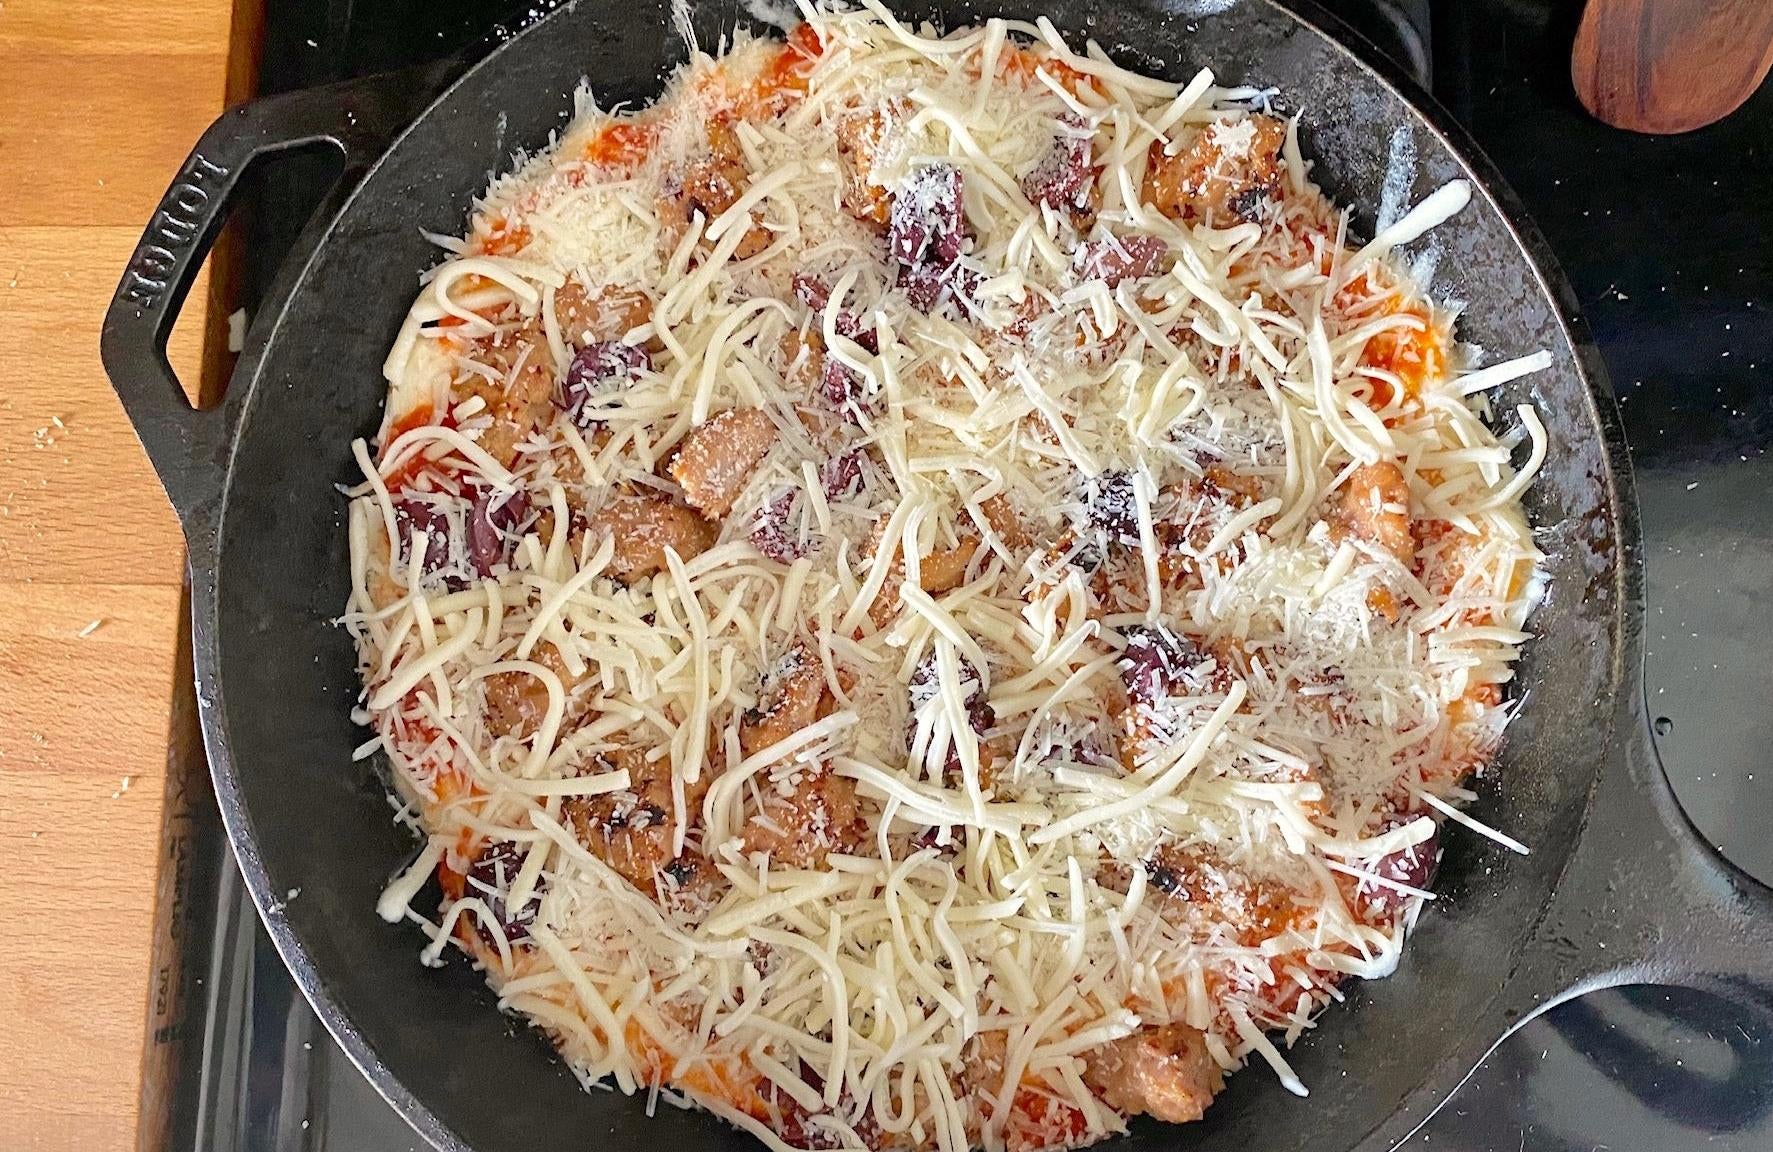 Cheesed, and ready for the oven. (Photo: Allie Chanthorn Reinmann)